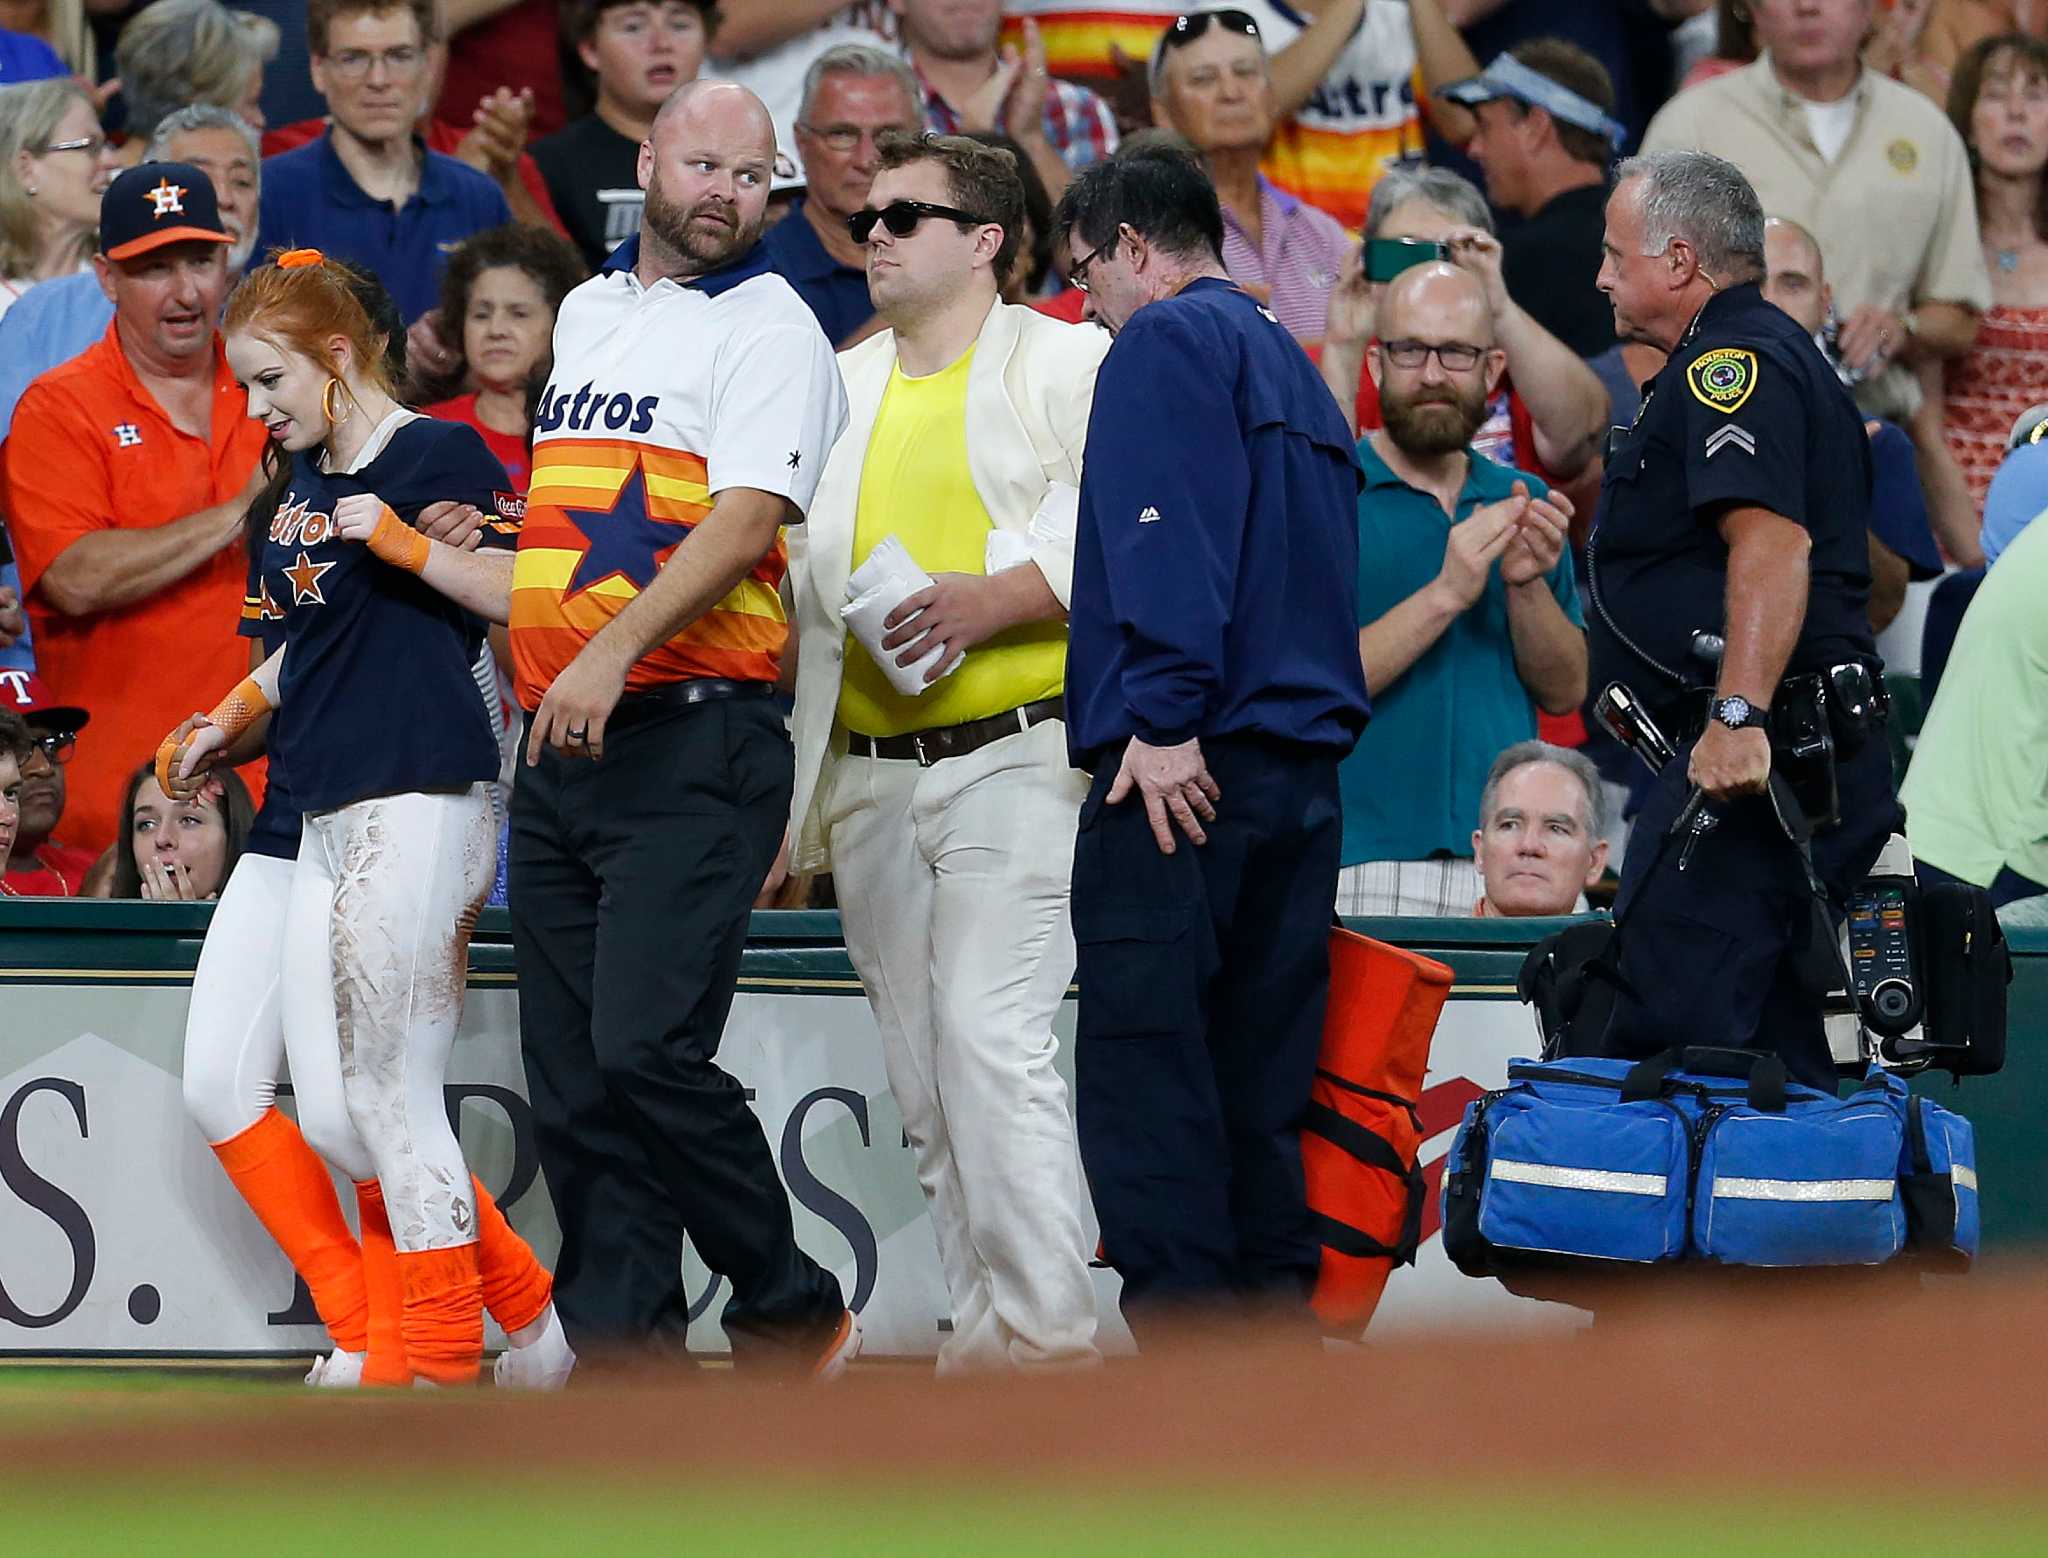 Astros Sign Lady is Unstoppable